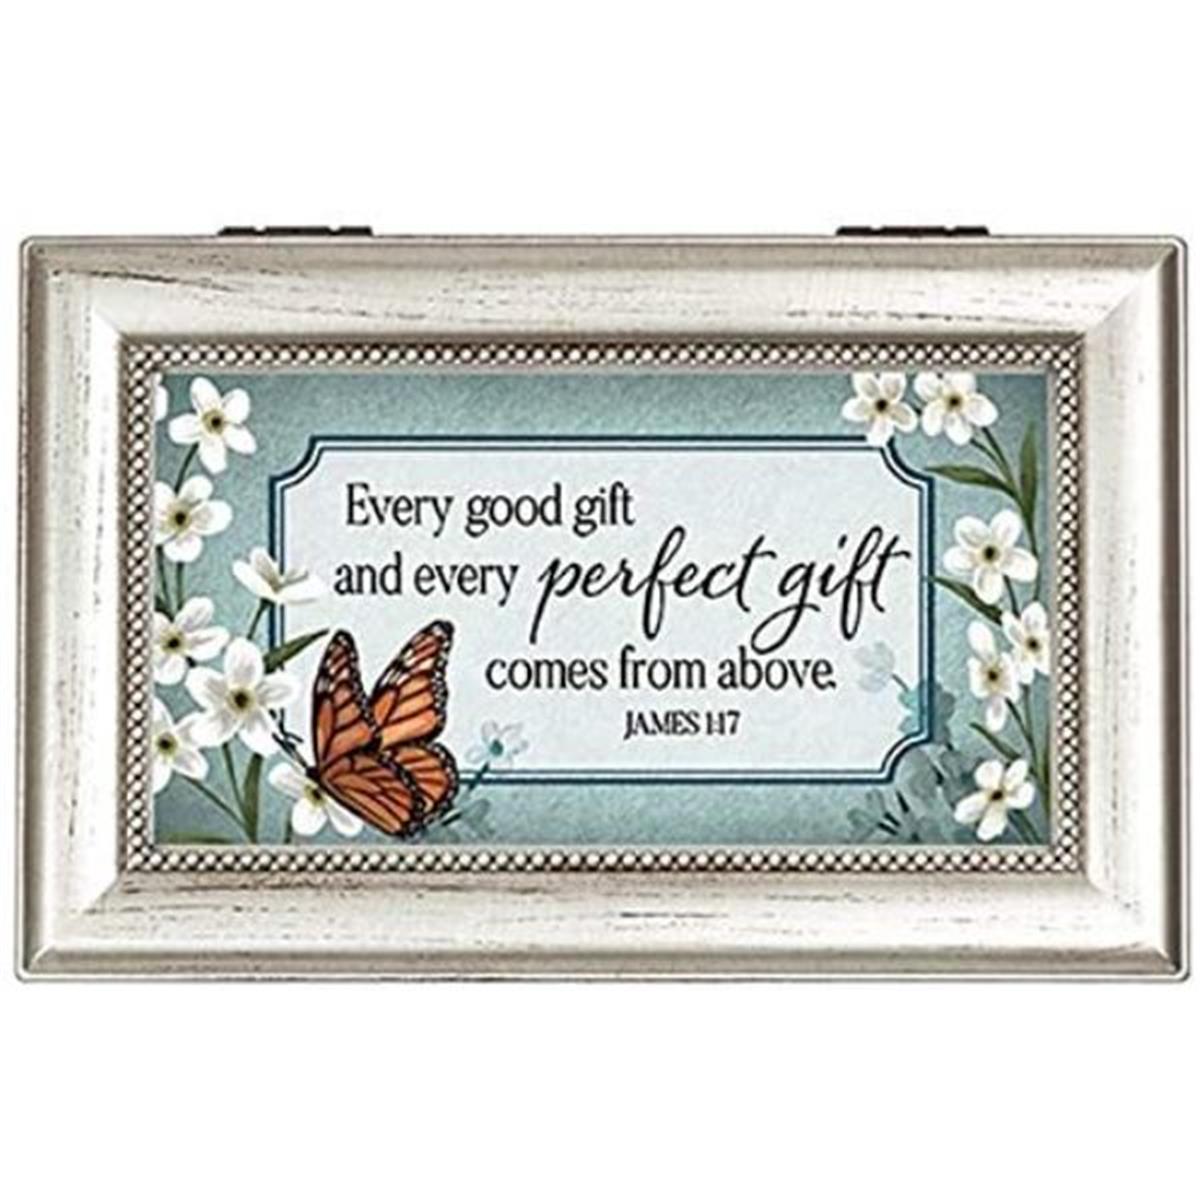 Picture of Carson Home Accents 272289 6 x 4 x 2.5 in. Music Box-Perfect Gift & Amazing Grace Home Decor